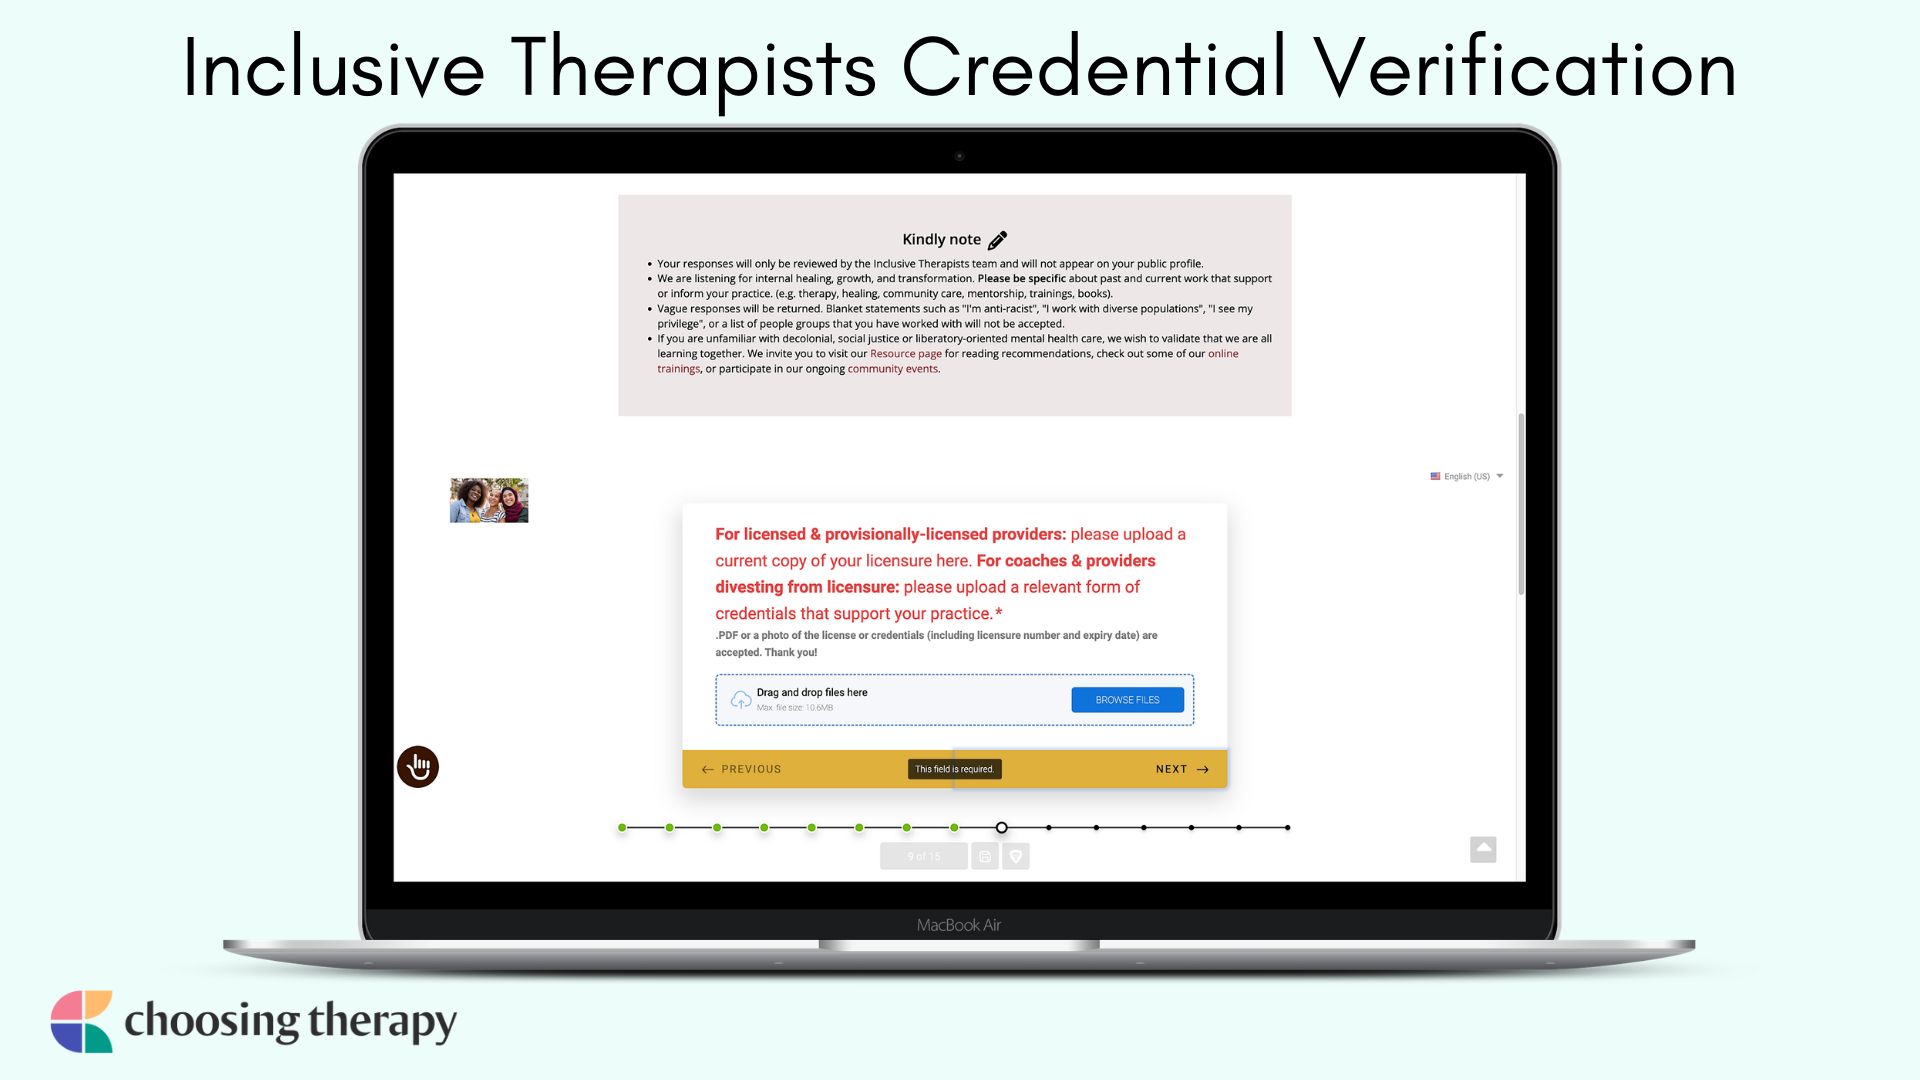 Image of Inclusive Therapists Credential Verification